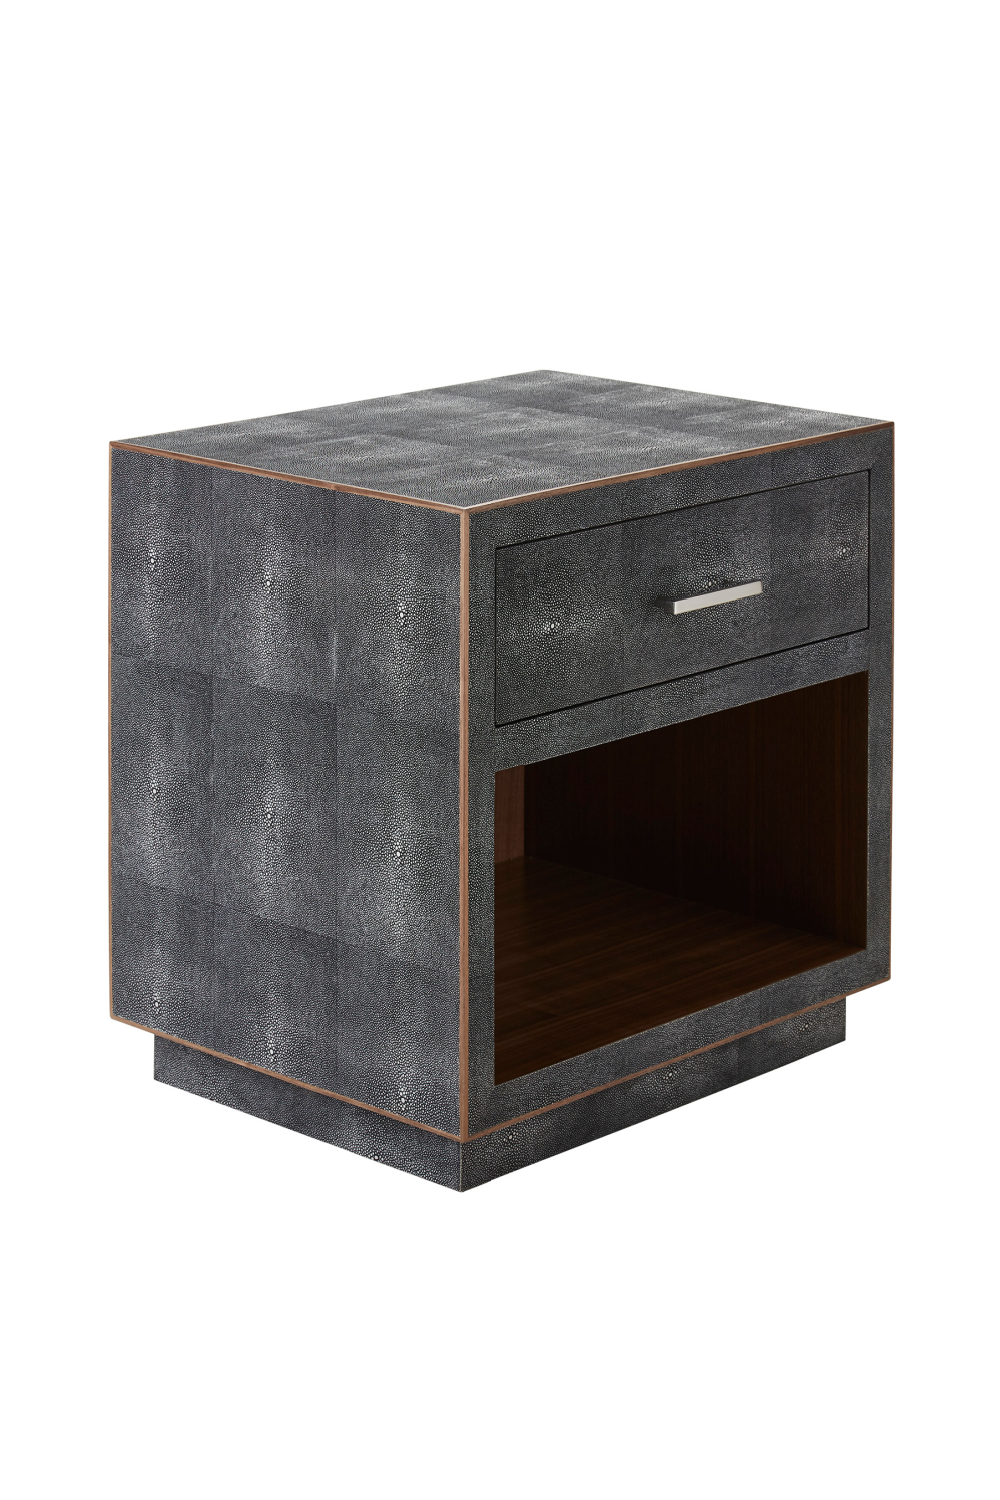 Gray Shagreen with Drawer Bedside Table | Andrew Martin Fitz | OROA